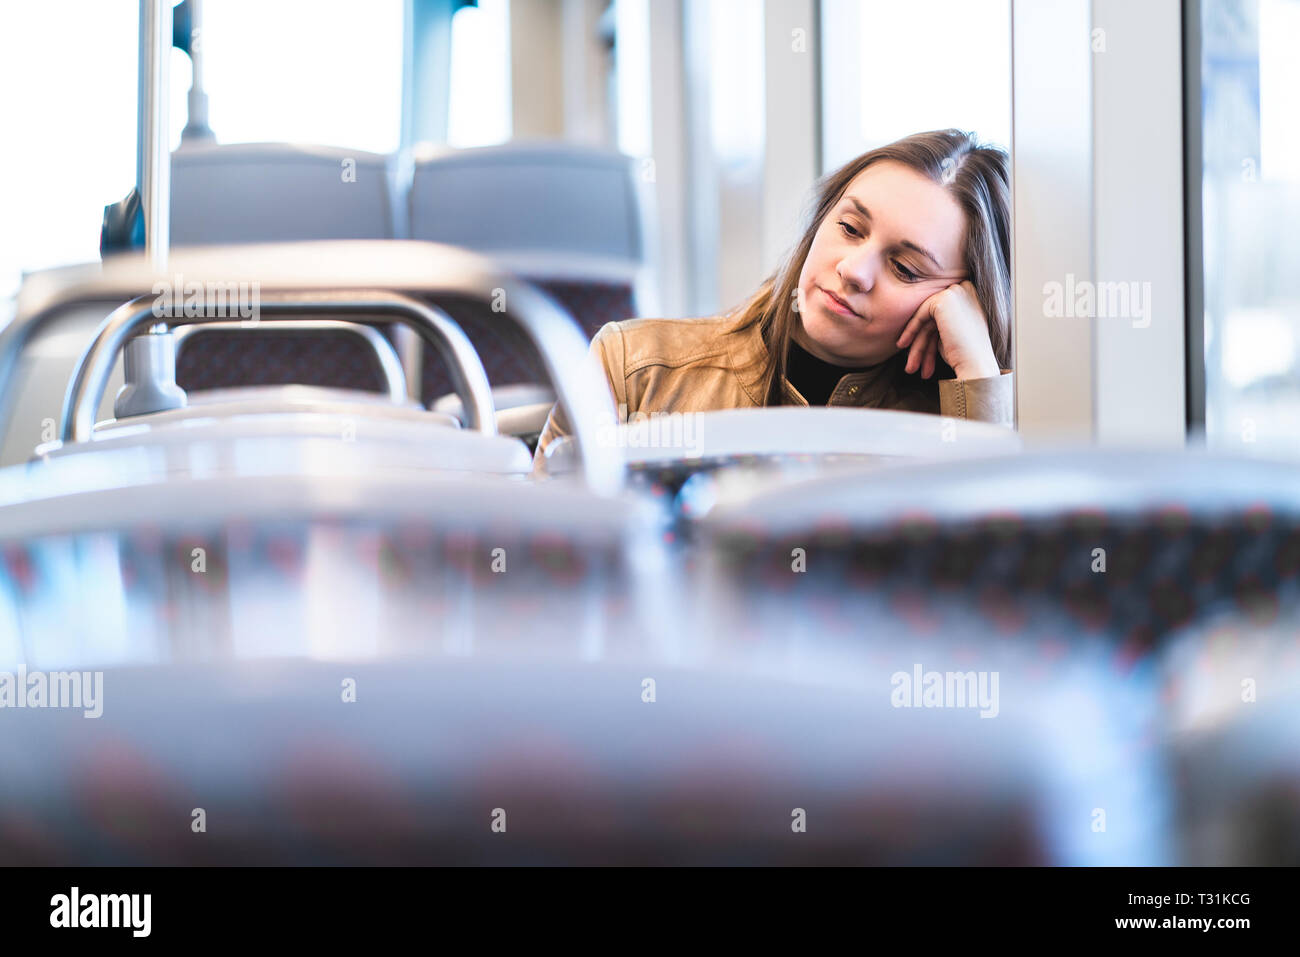 Sad tired woman in train or bus. Bored or unhappy passenger sitting in tram leaning against hand. Upset lady on a late delayed bus. Stock Photo